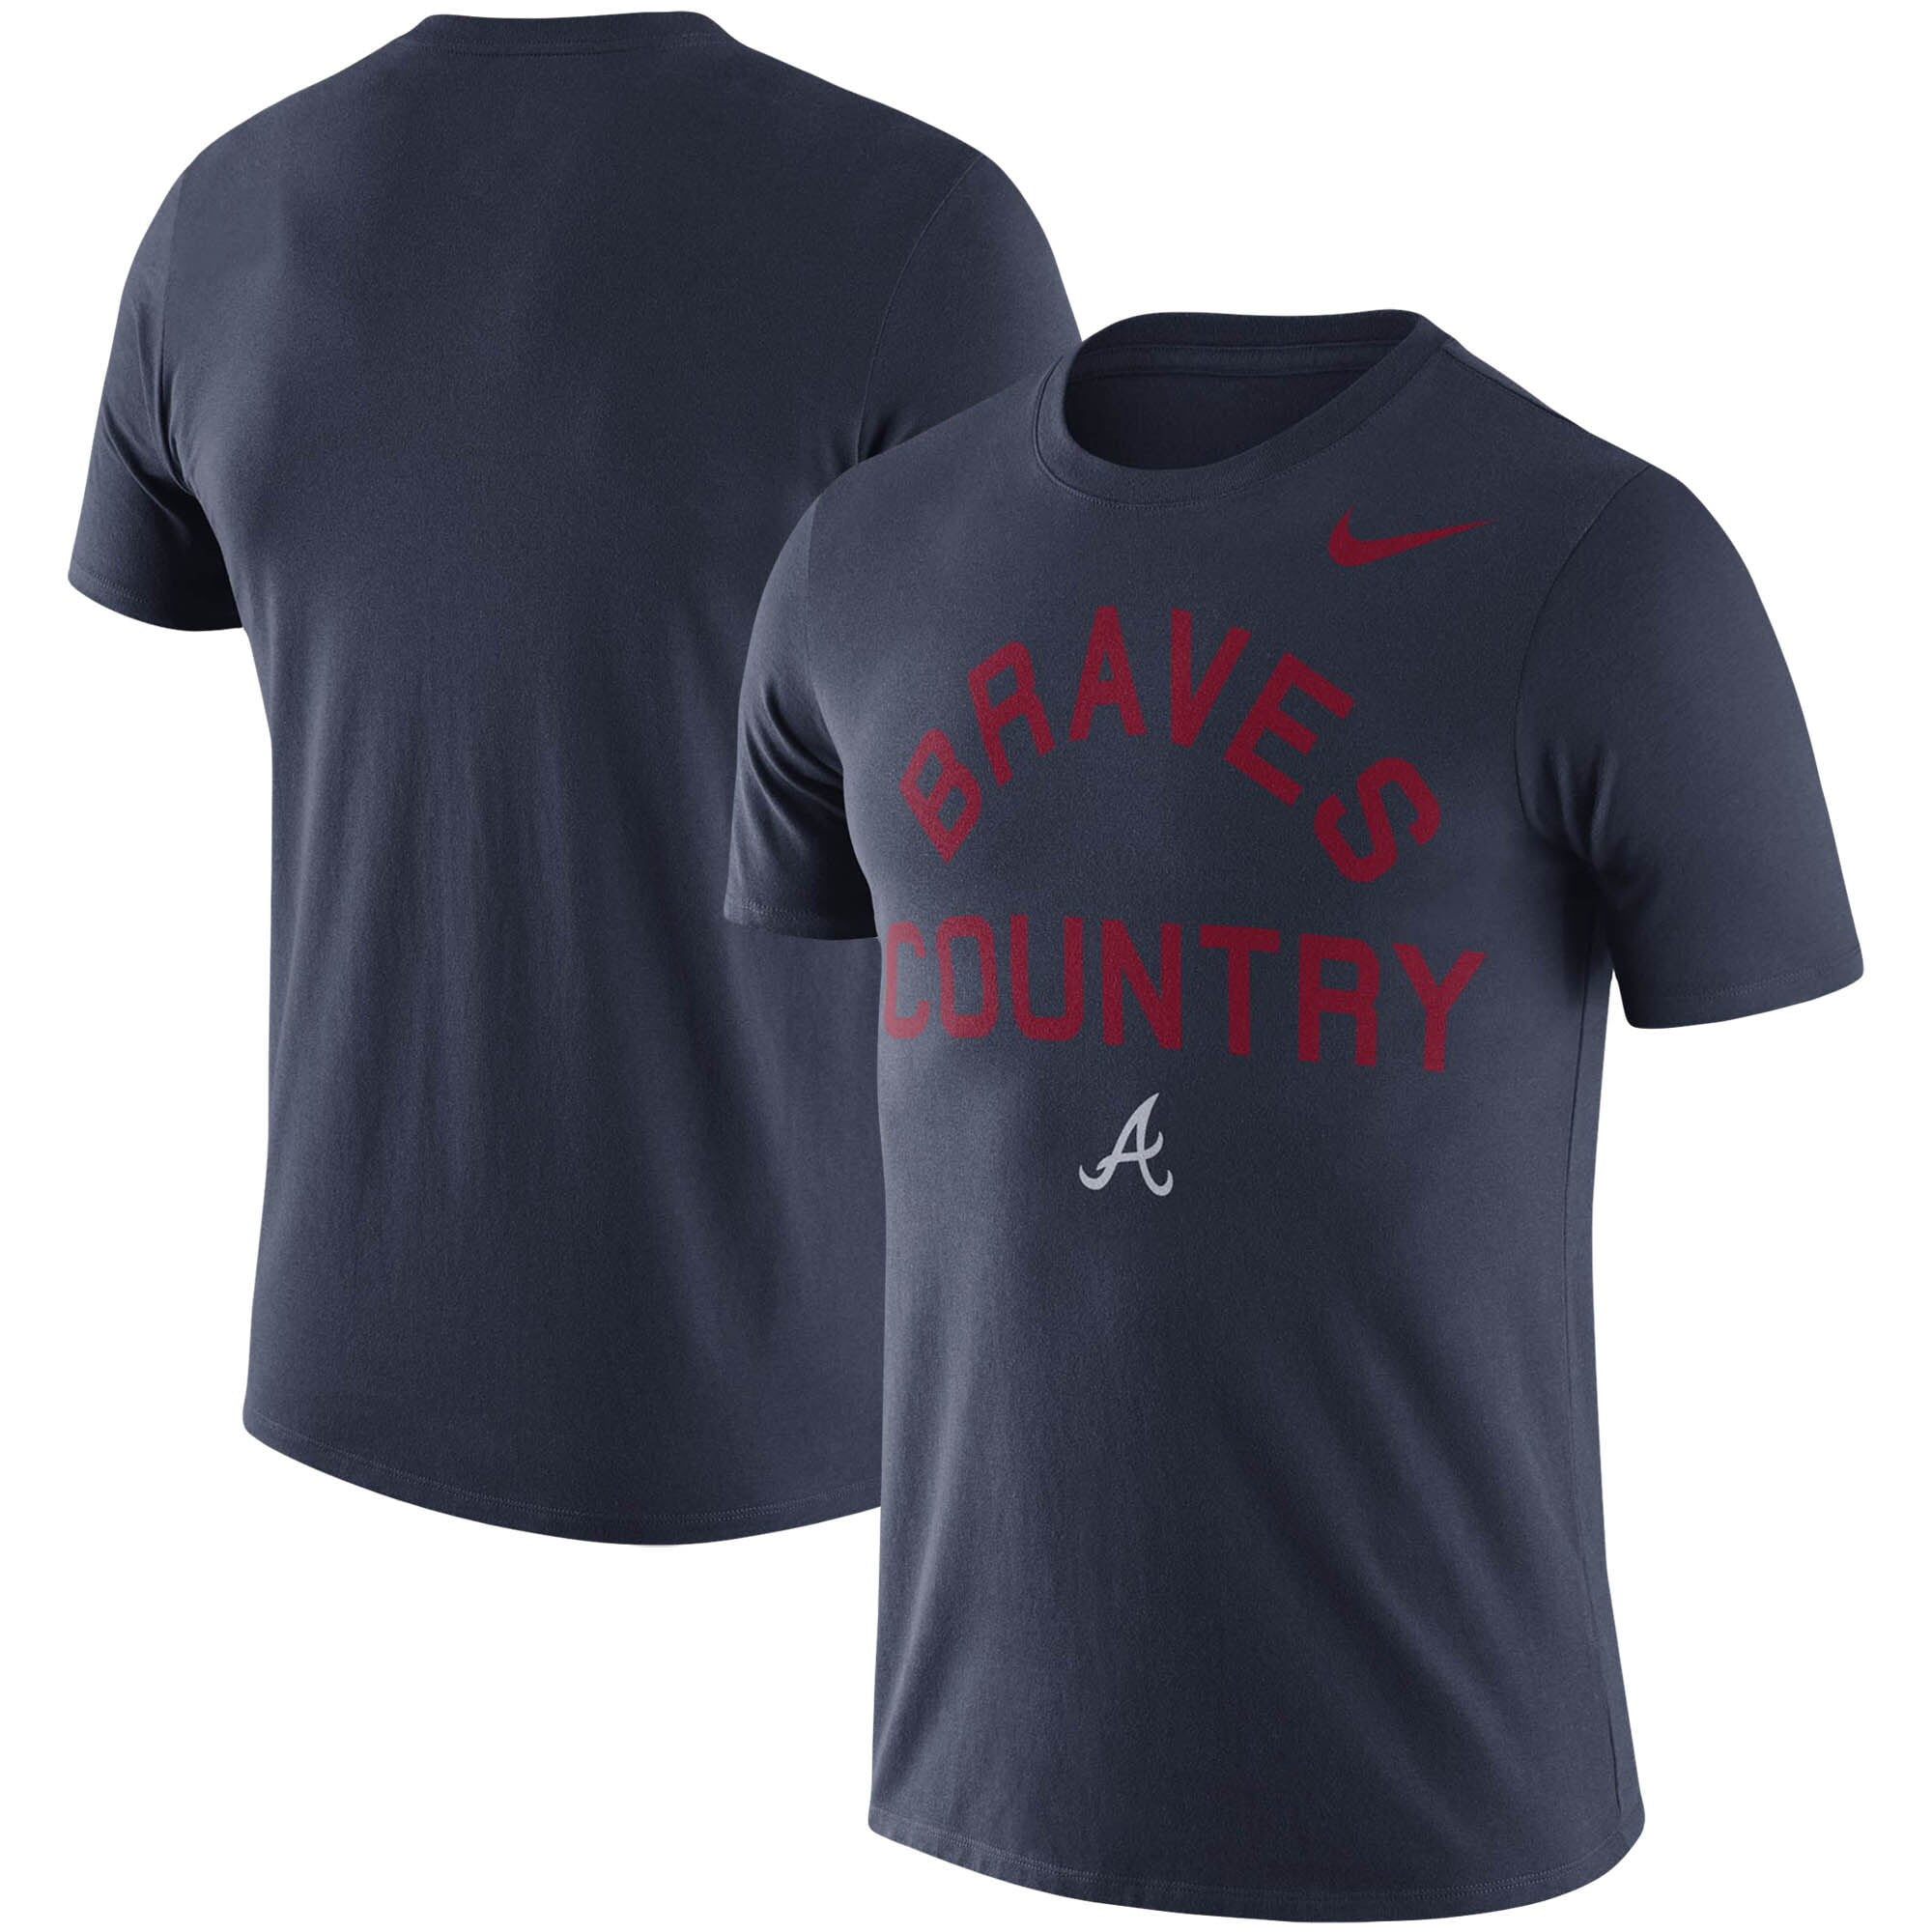 braves country t shirt